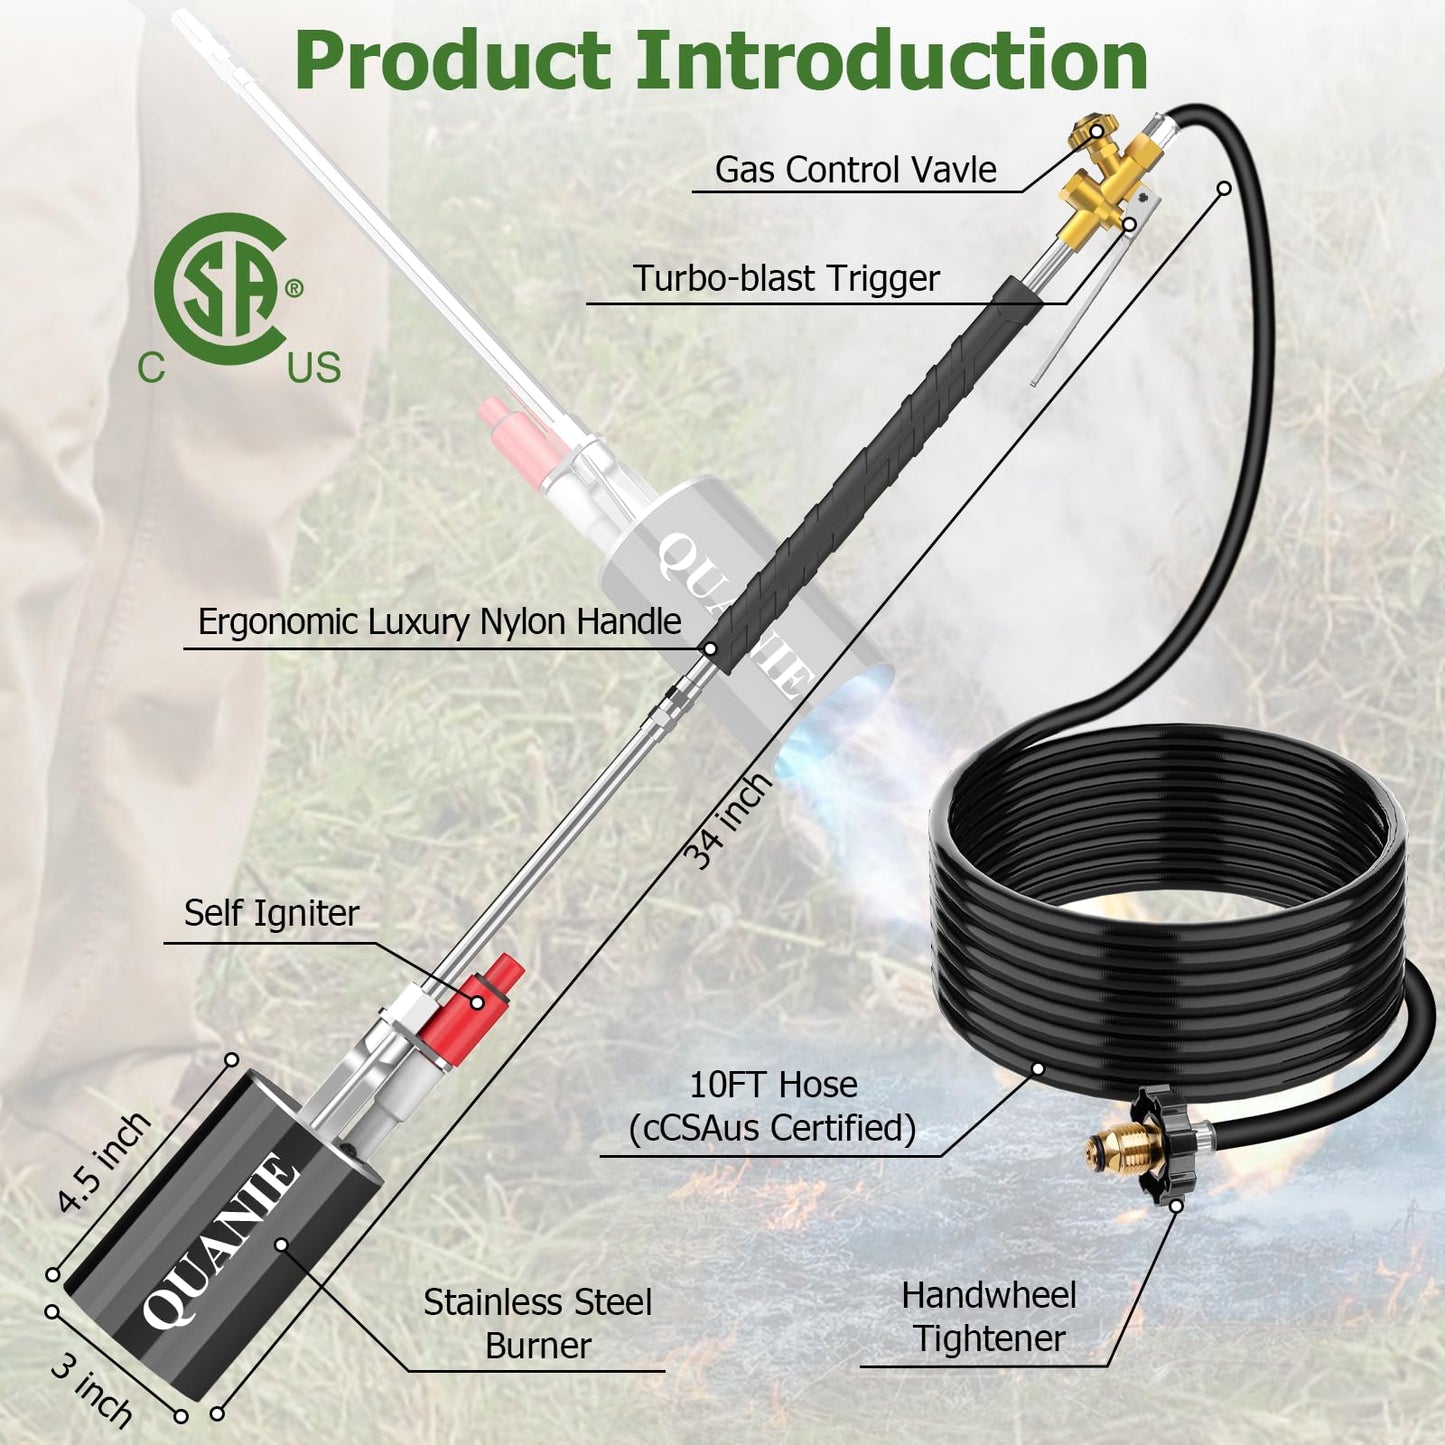 Propane Torch Weed Burner Kit, Blow Torch High Output 1,800,000 BTU with Self Igniter and Turbo-Blast Trigger,Heavy Duty Flamethrower with 10FT Hose for Weeding,Roof Asphalt,Ice Snow,Road Marking